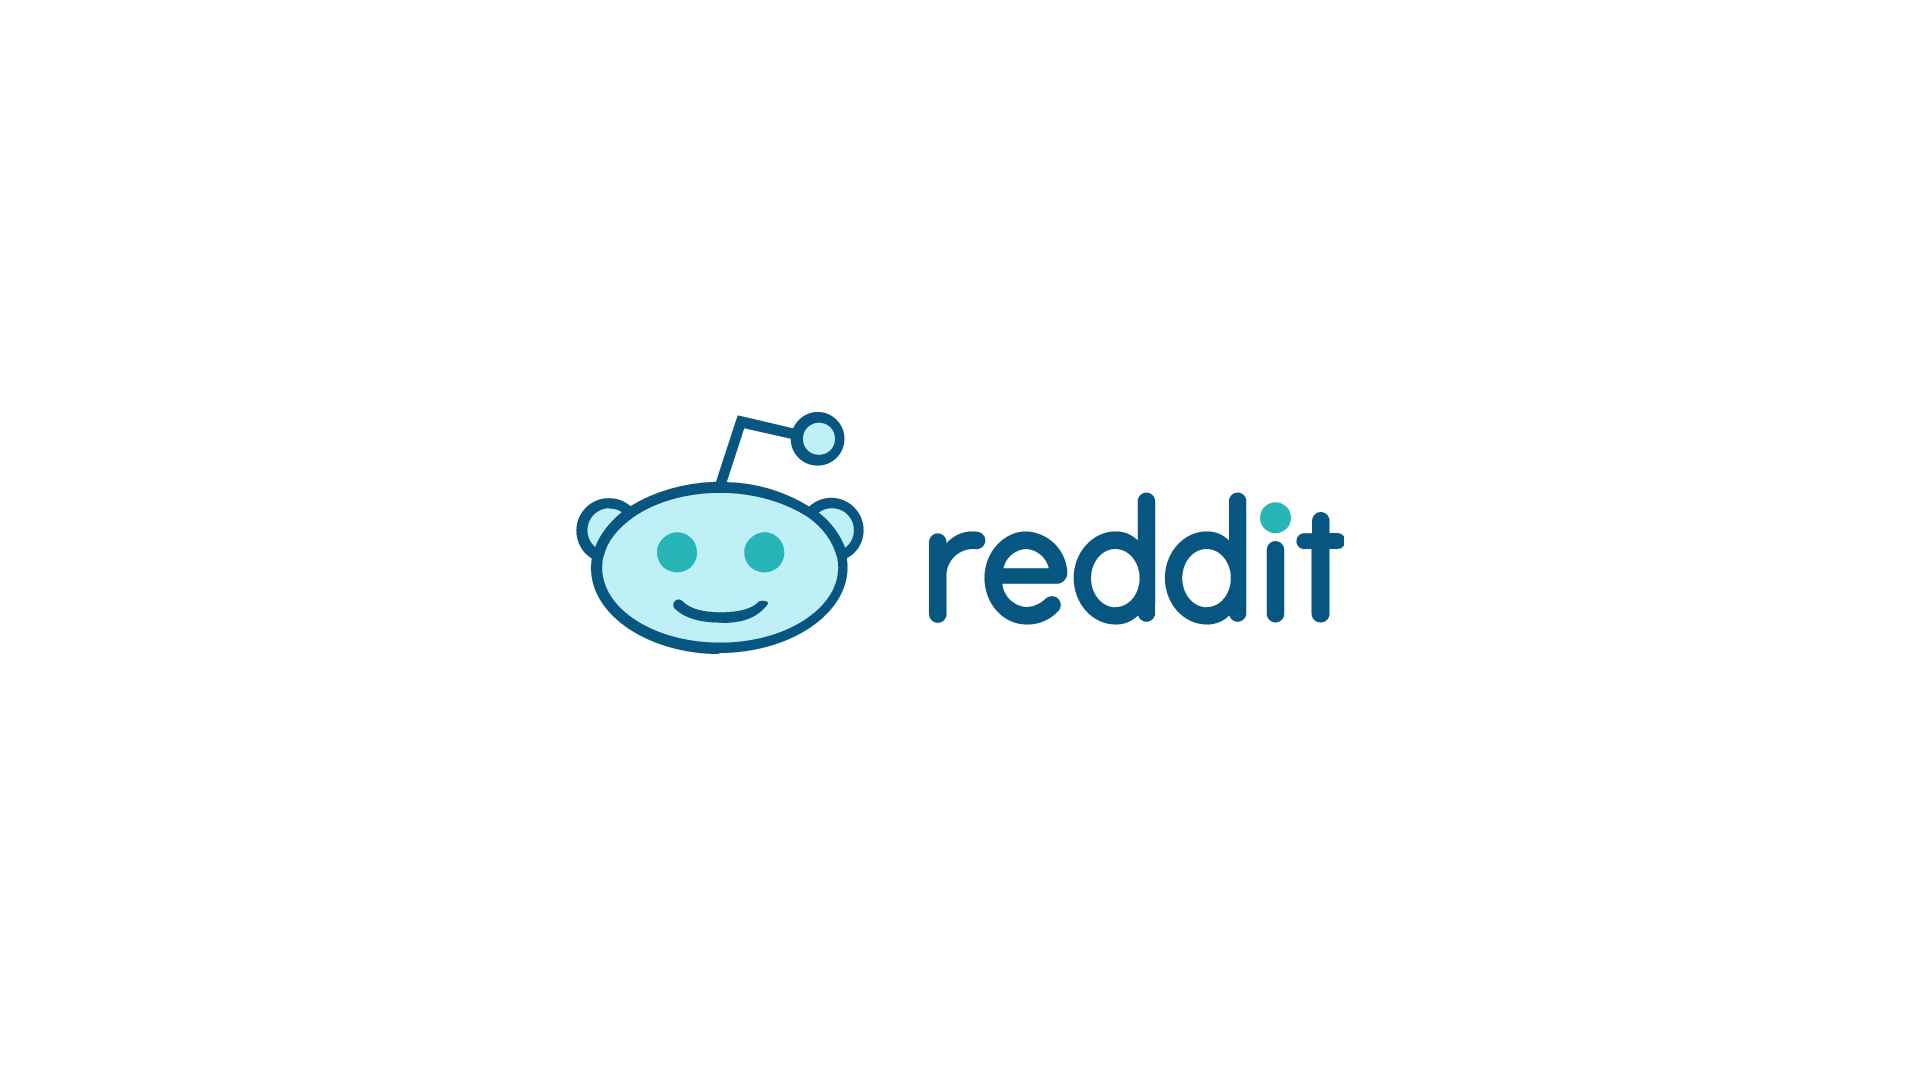 How can one create a Reddit account and what information is required?